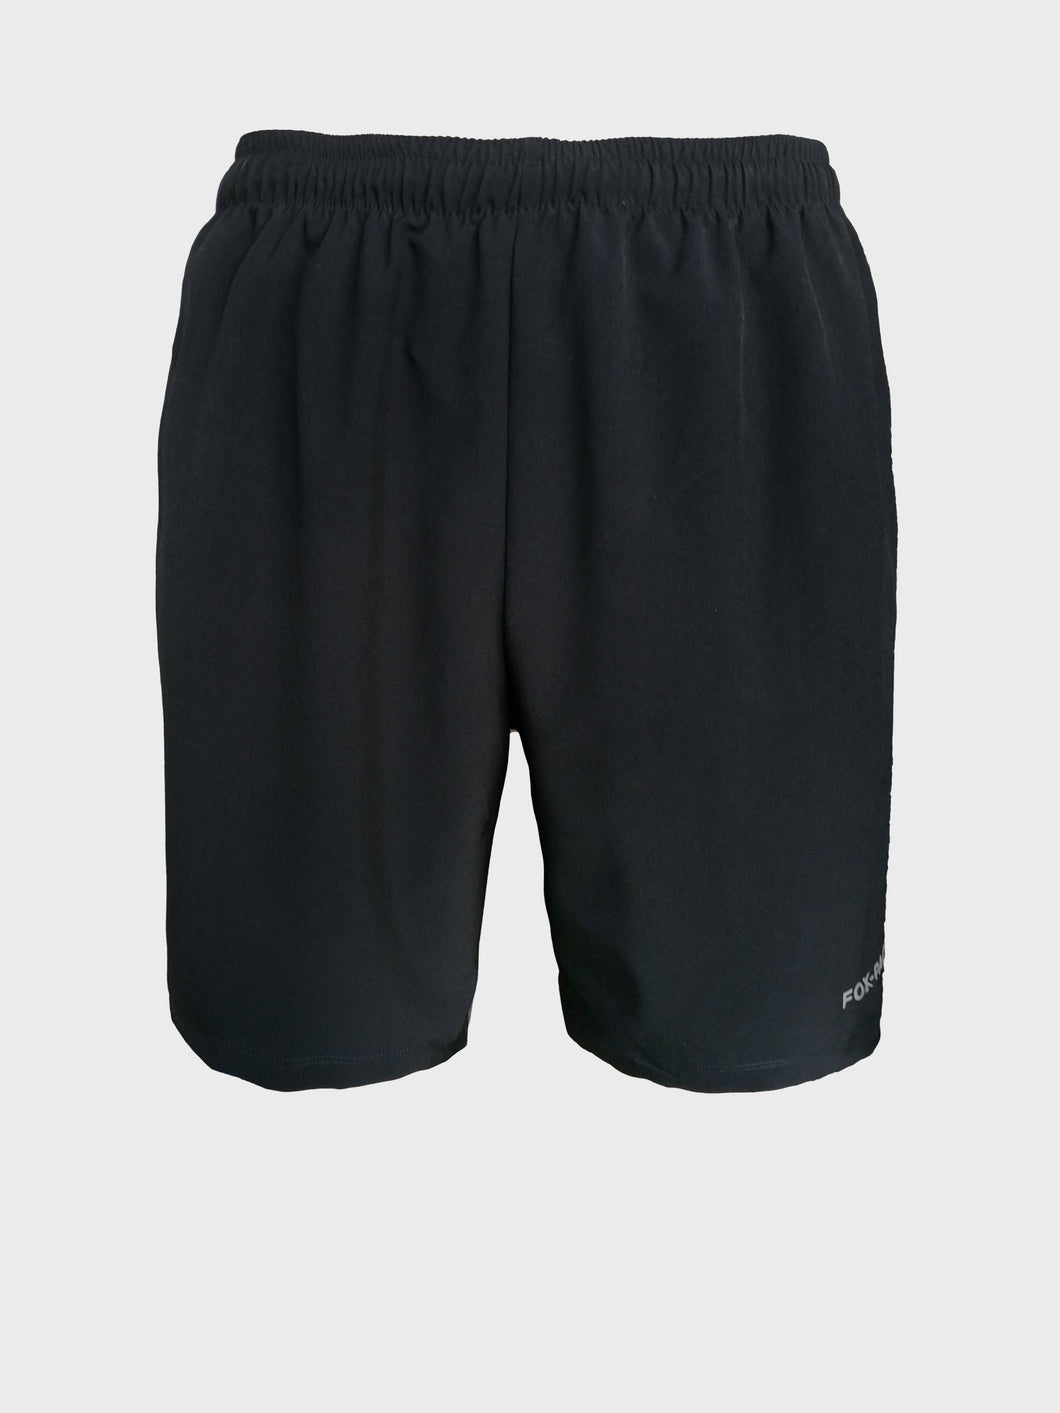 Men's running shorts with inner long shorts and pockets - RESILIENCE - Fox-Pace